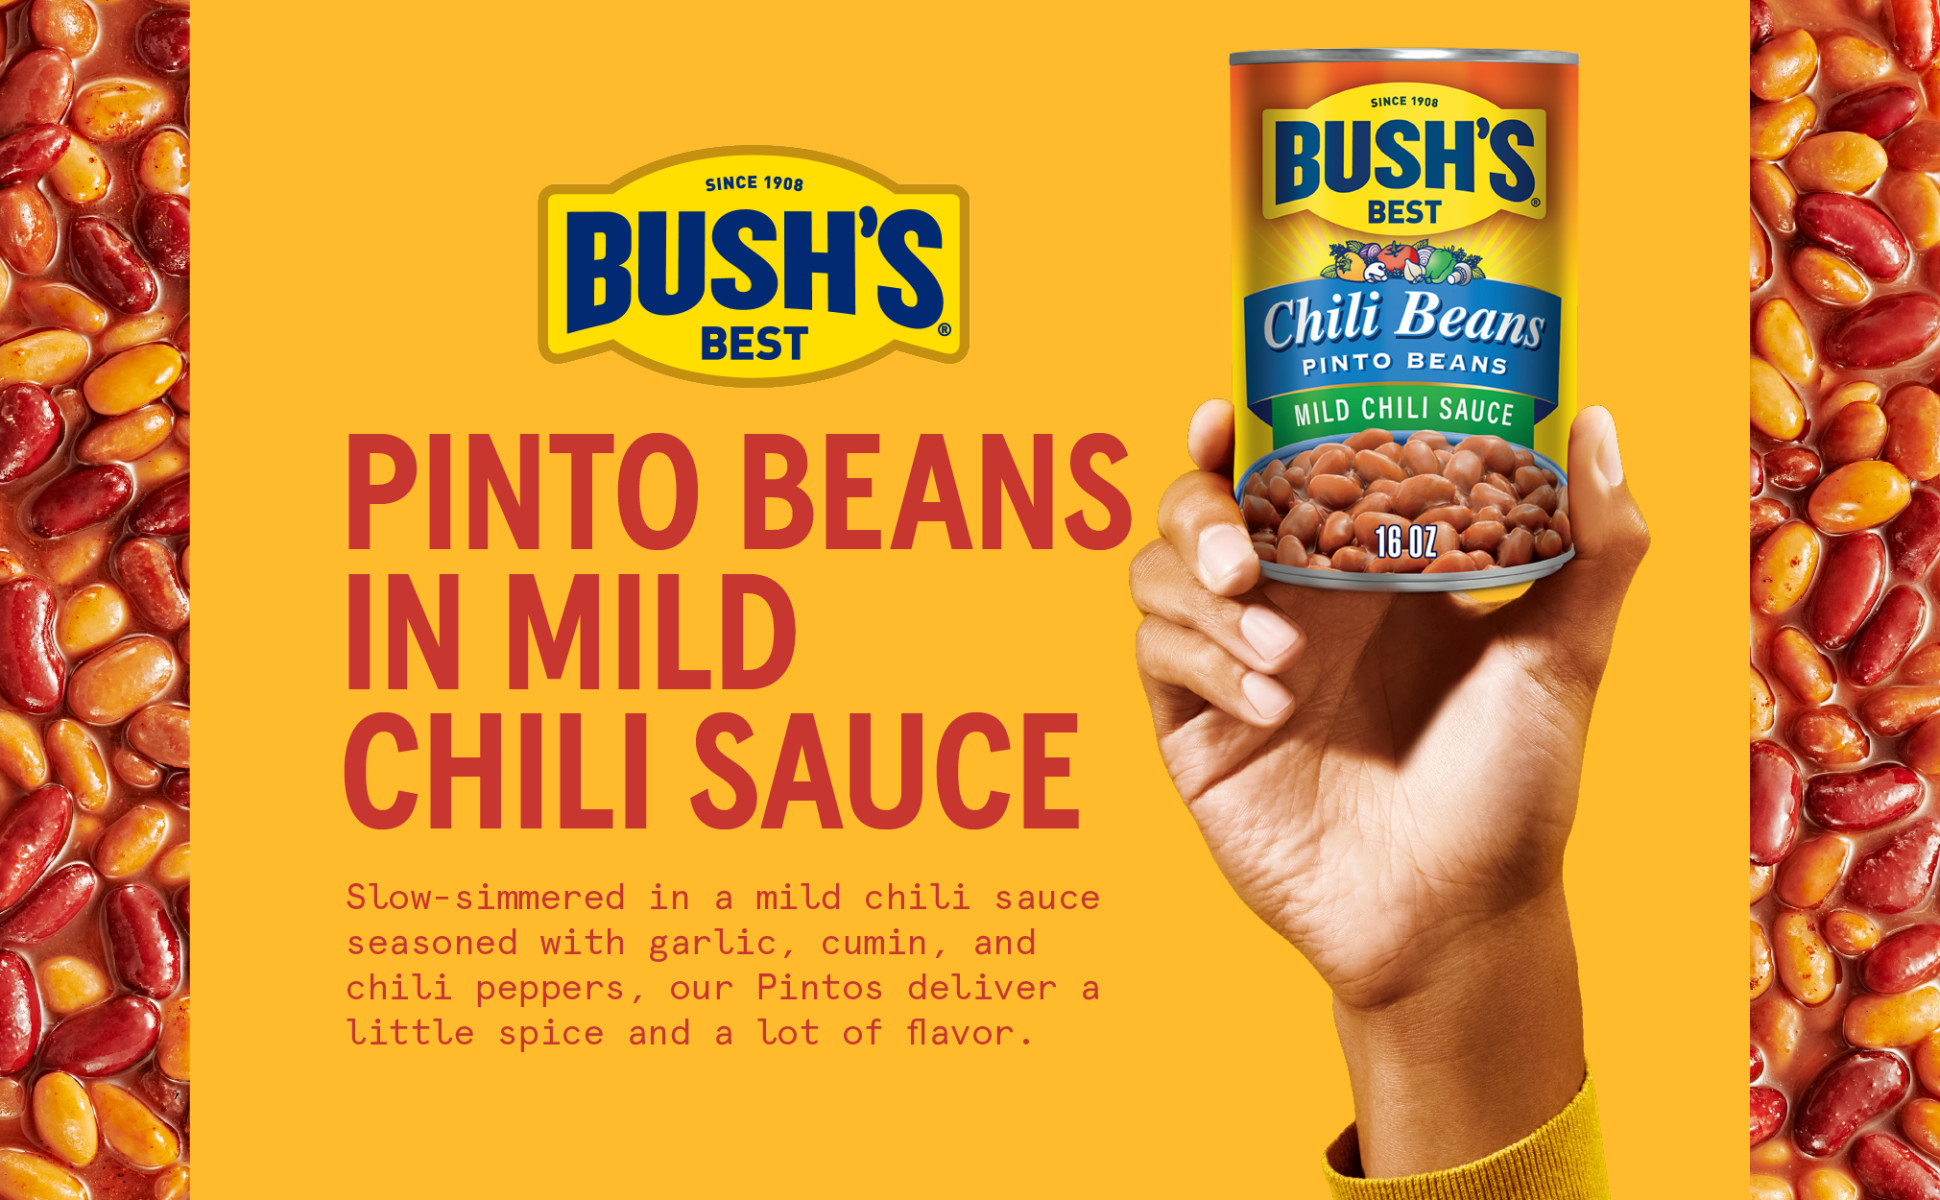 Bush's Chili Beans, Canned Pinto Beans in Mild Chili Sauce, 27 oz